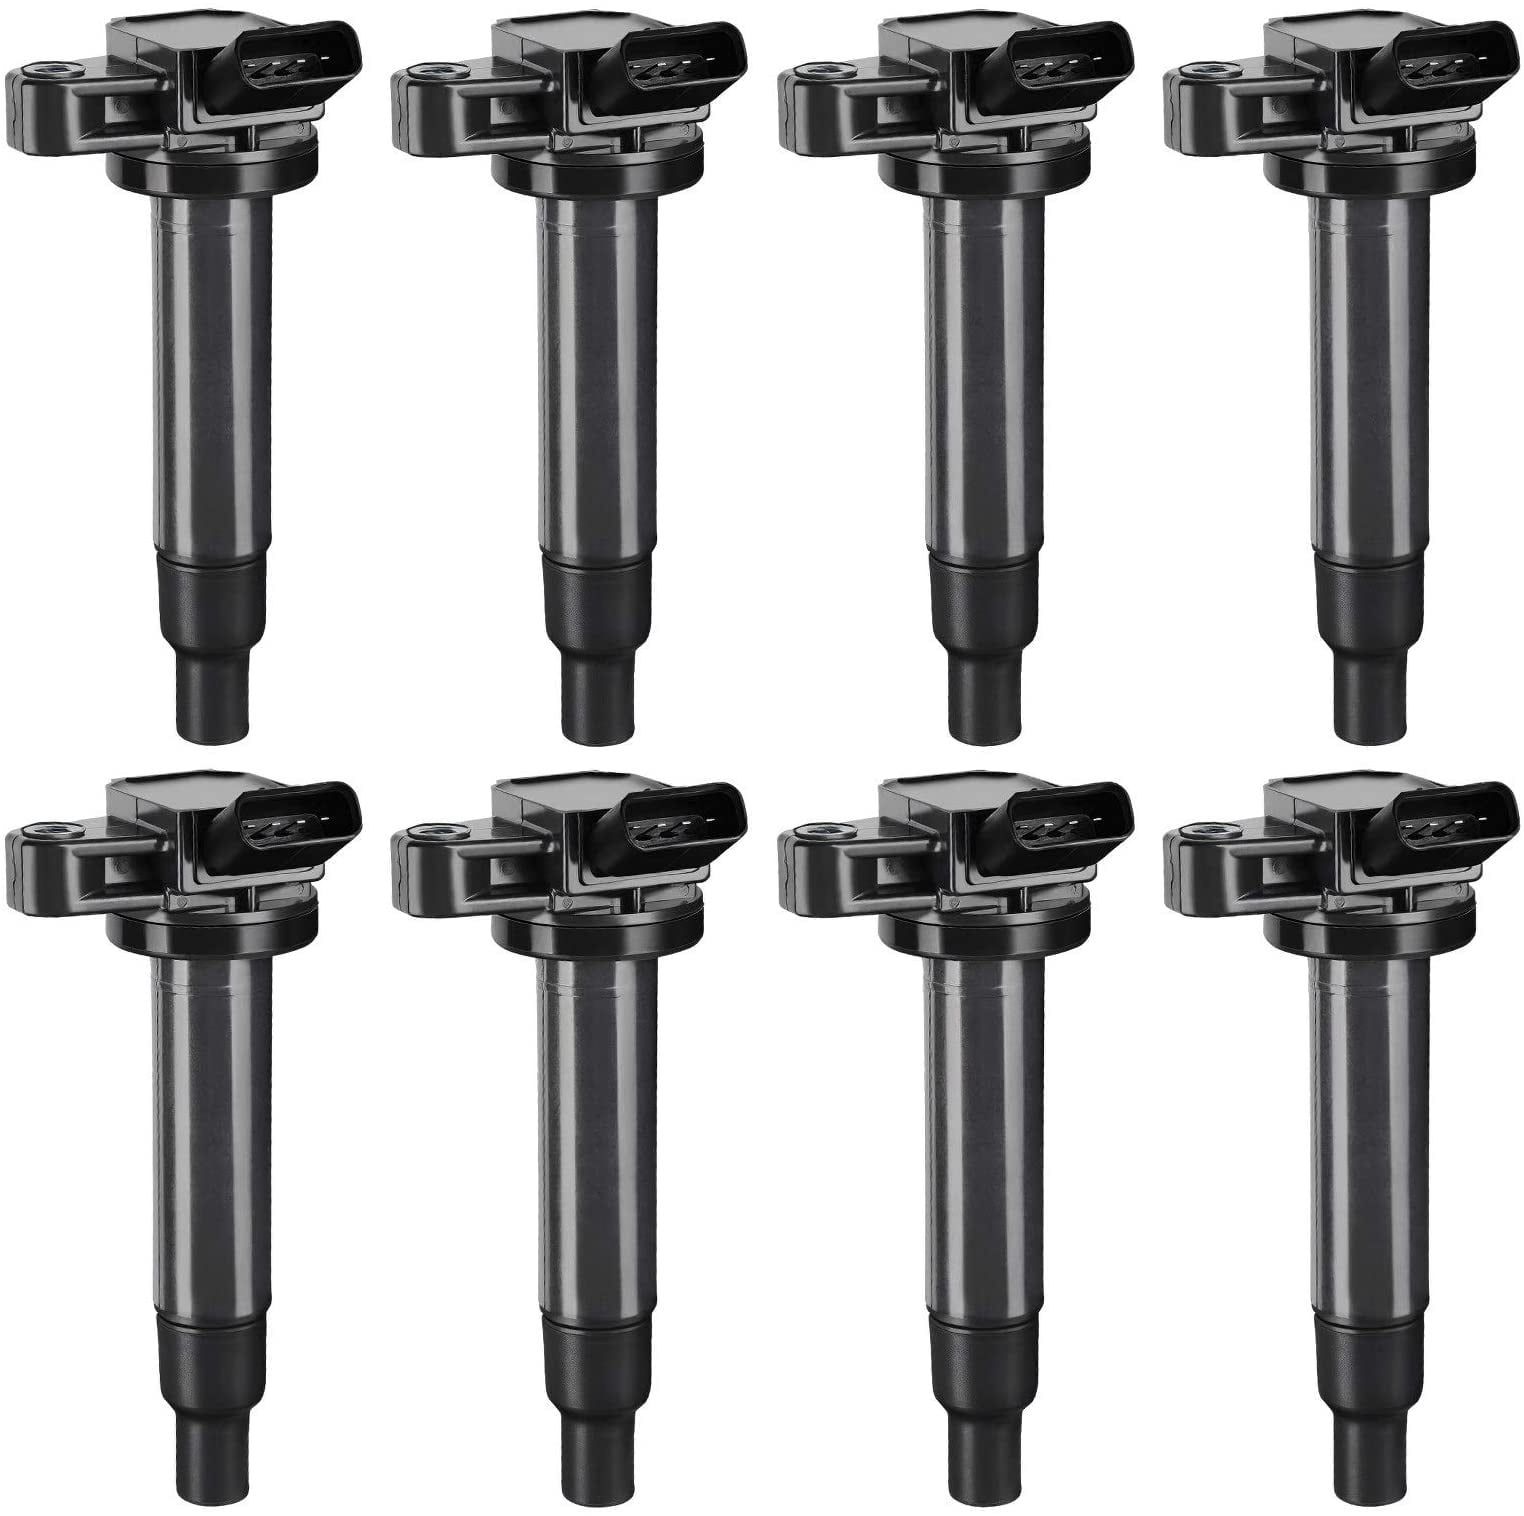 Set of 8 Ignition Coils Pack for Toyota Land Cruiser 4Runner Sequoia Tundra Lexus GS430 LS430 GX470 LX470 LX570 SC430 